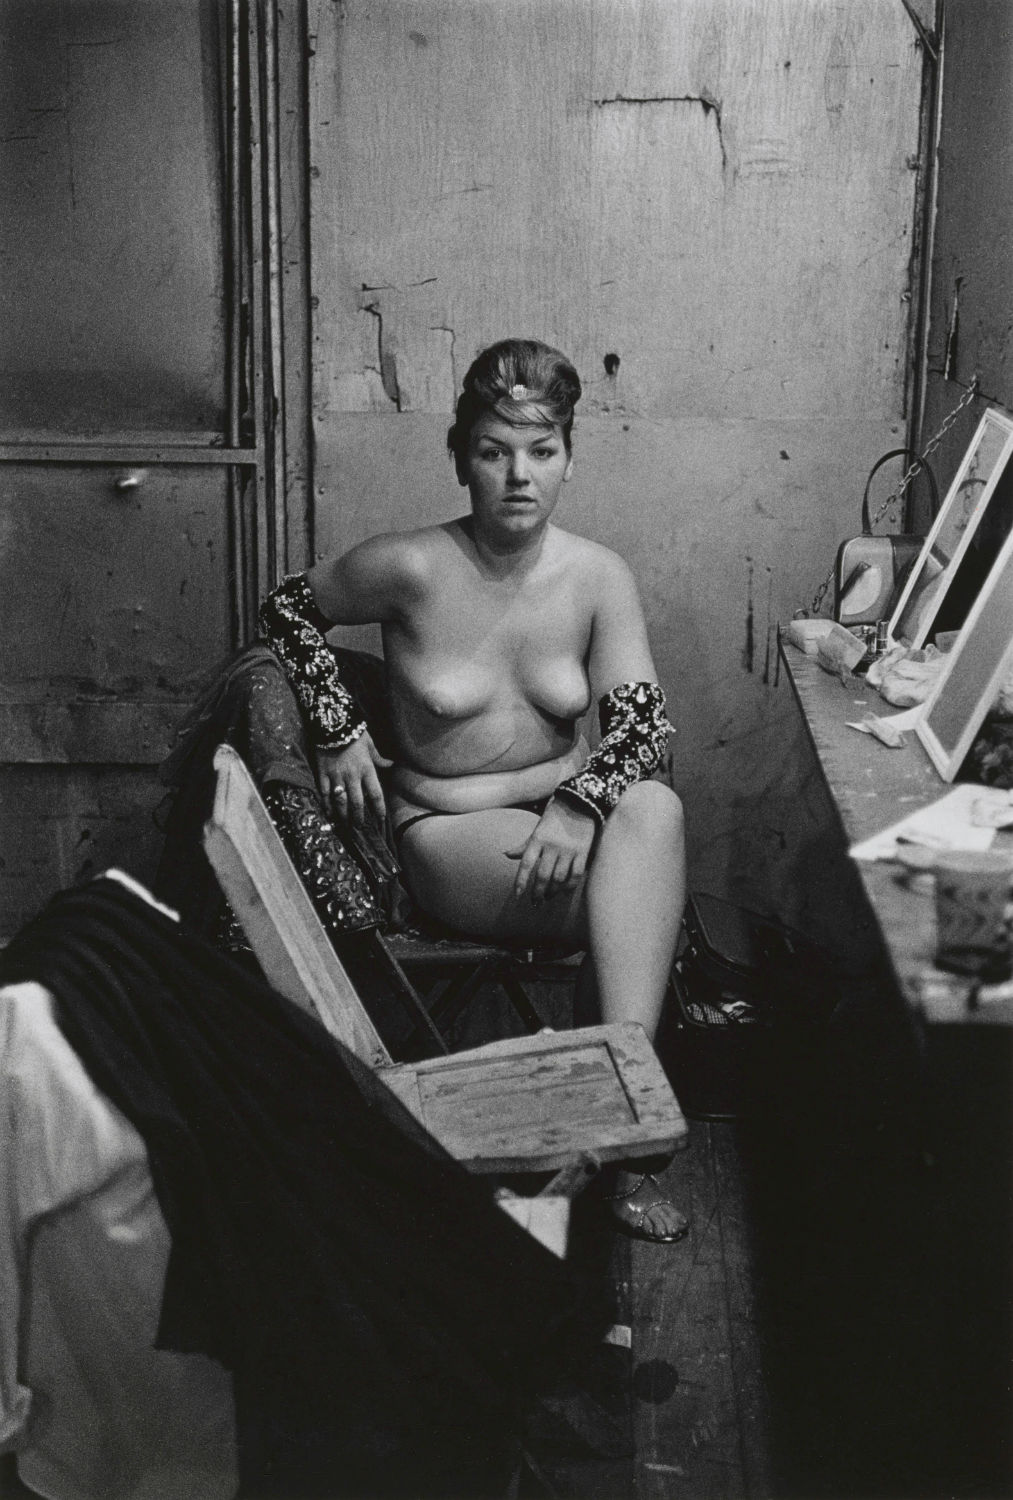 Stripper with bare breasts sitting in her dressing room, Atlantic City, N.J. 1961